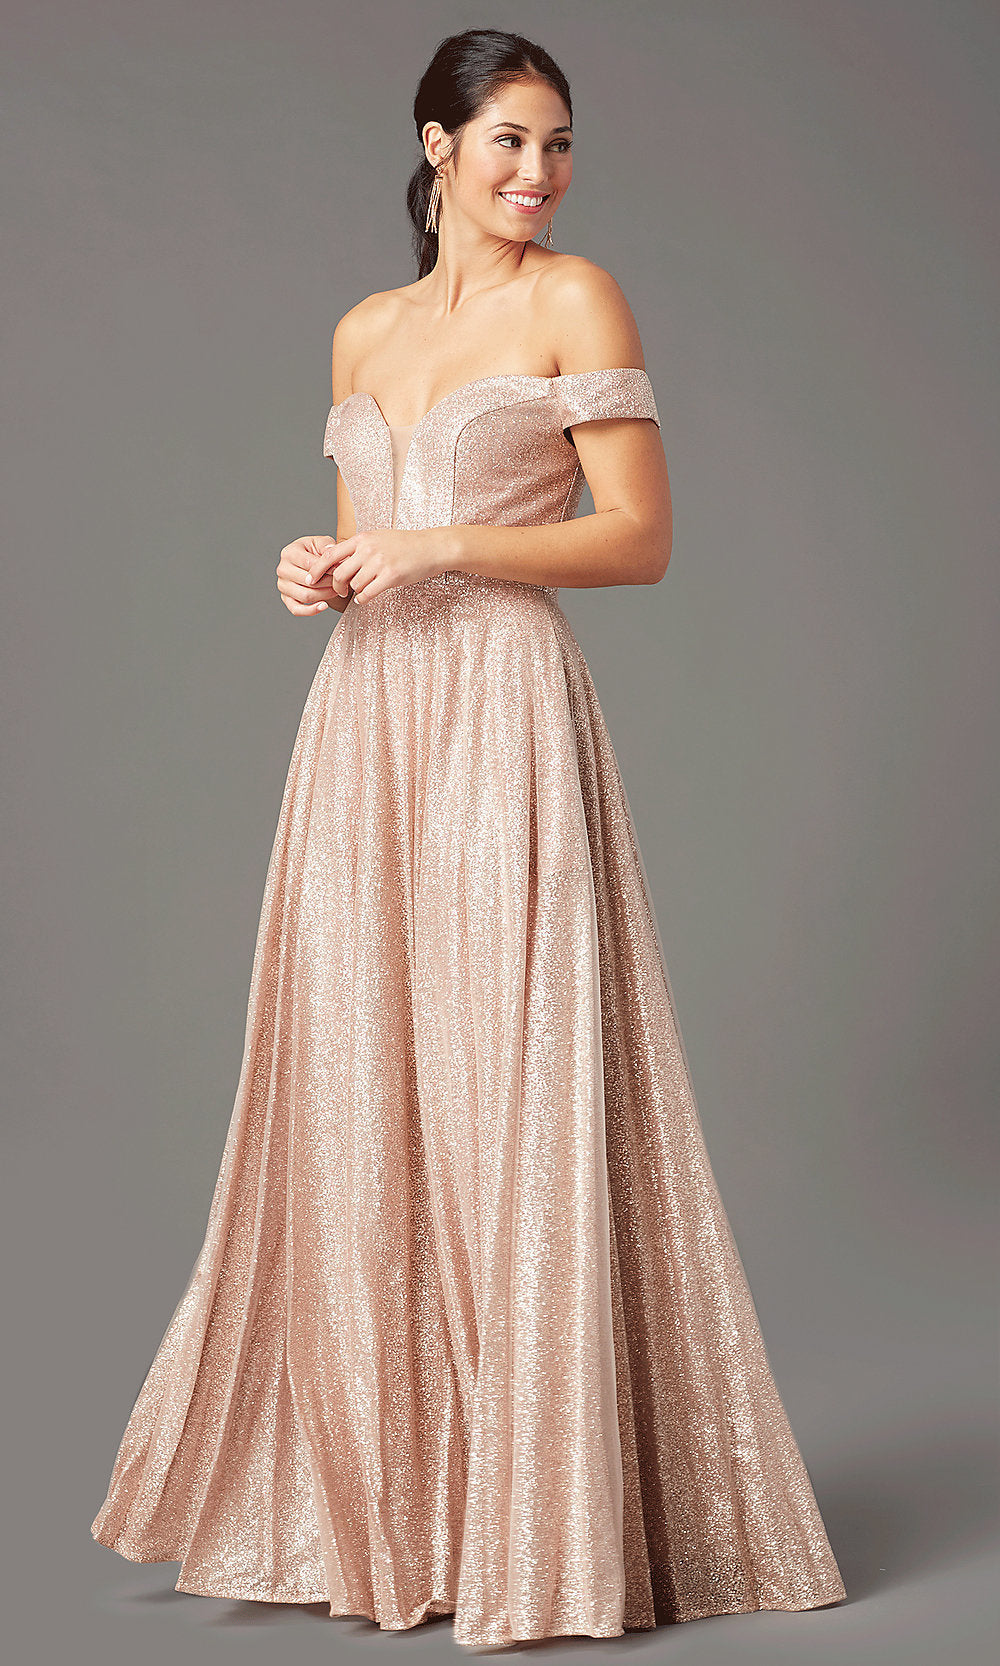  Sparkly Long Rose Gold Prom Dress by PromGirl